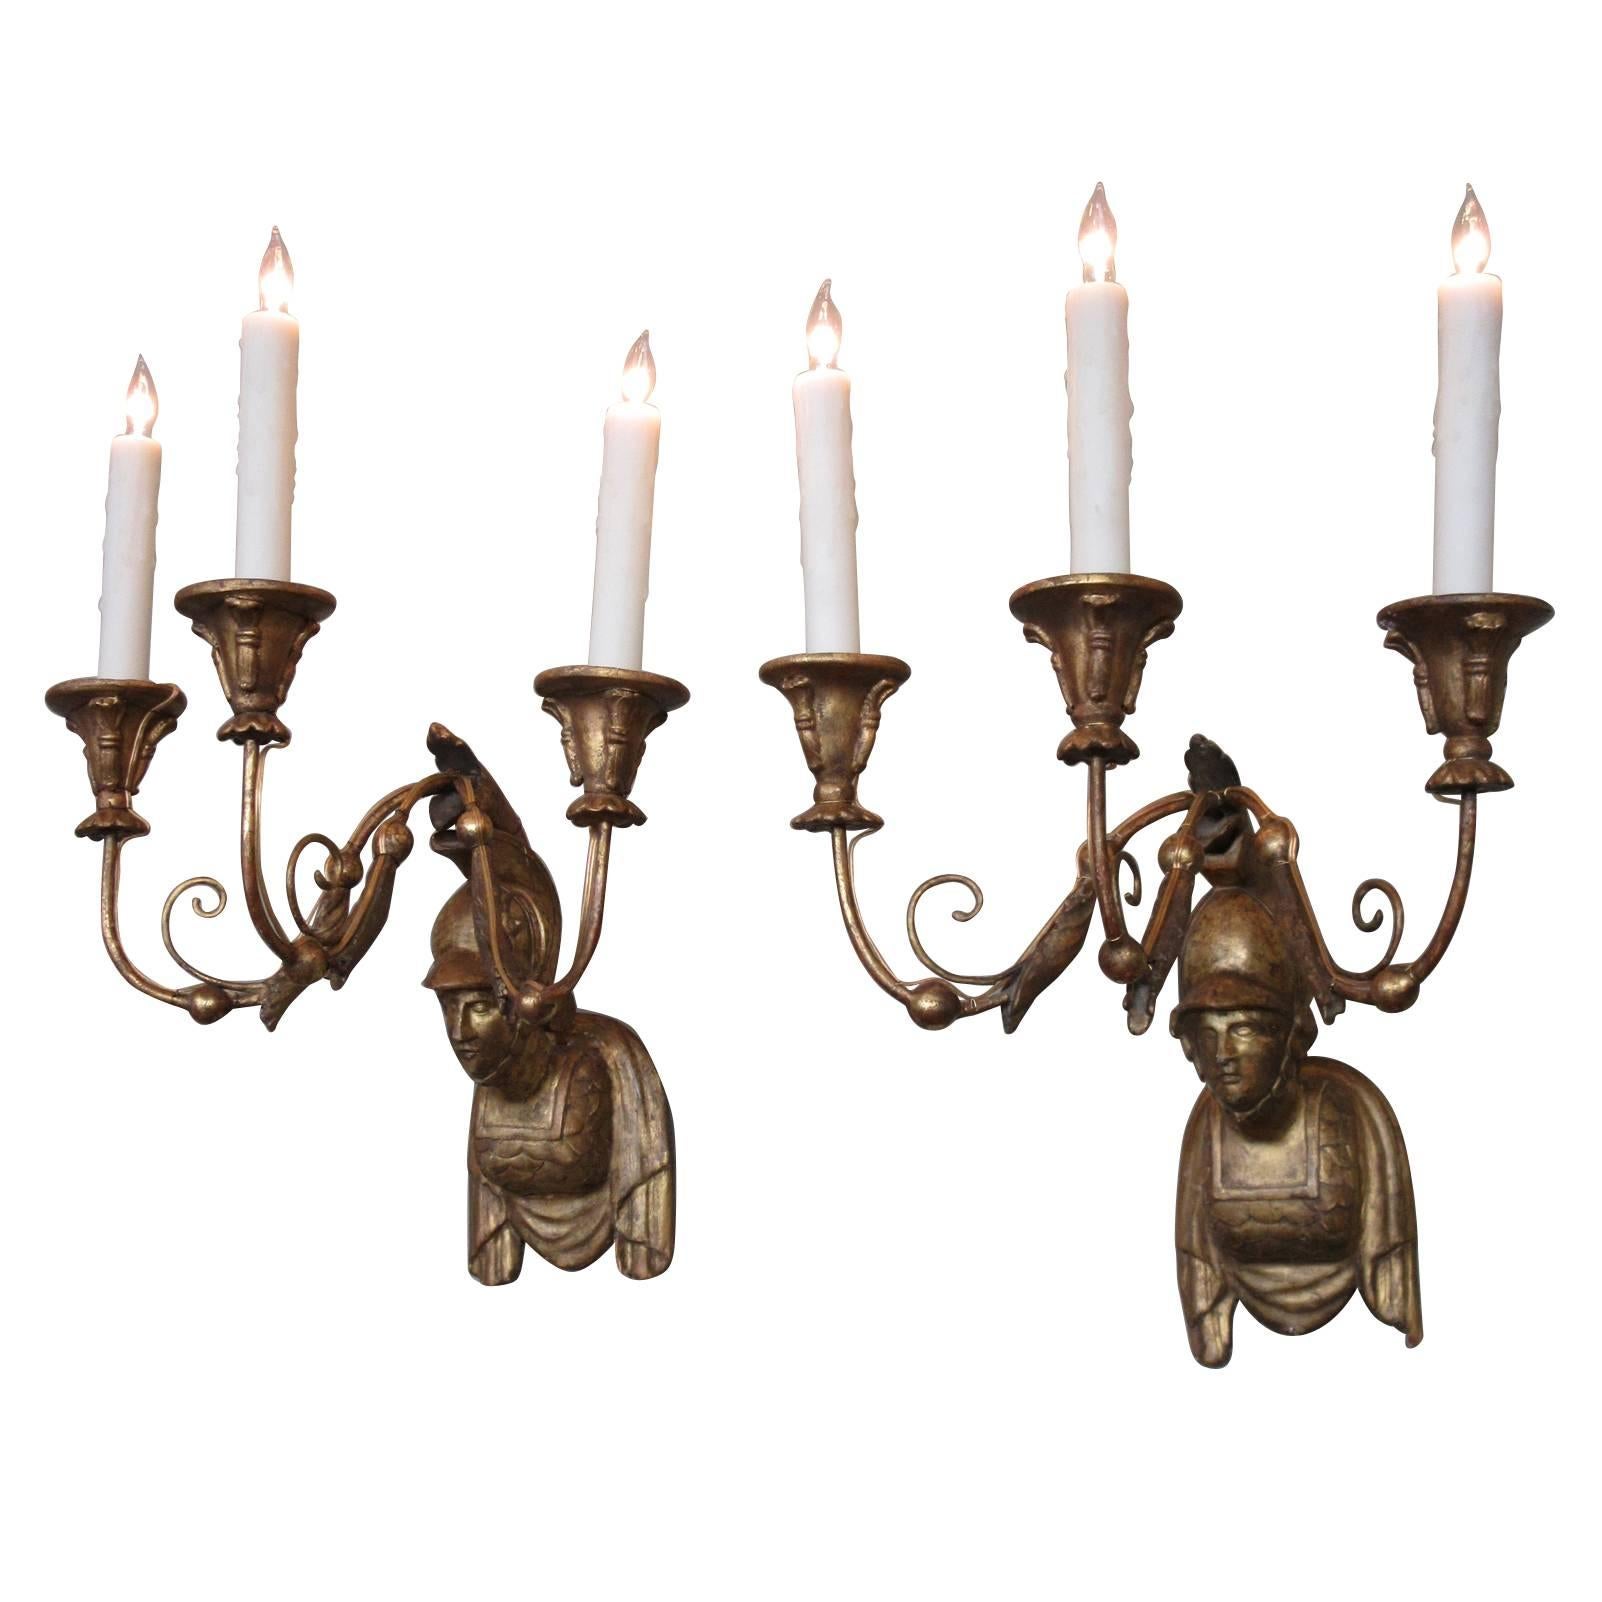 Early 19th Century Italian Neoclassical Giltwood Sconces with Roman Soldier Bust For Sale